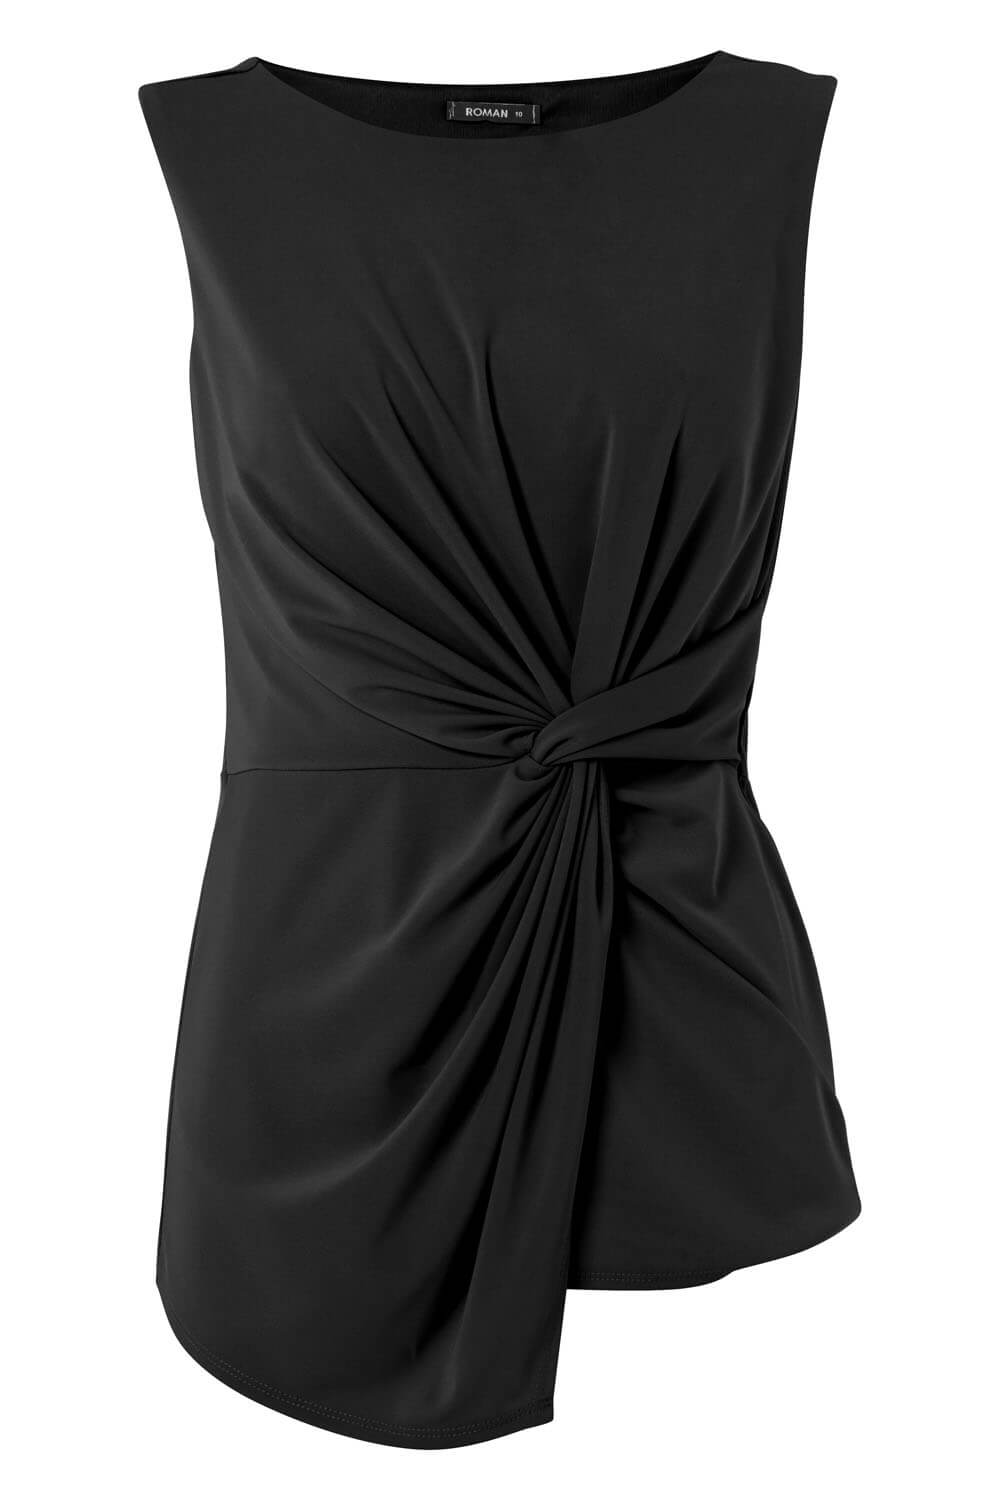 Black Sleeveless Knot Front Top , Image 4 of 8